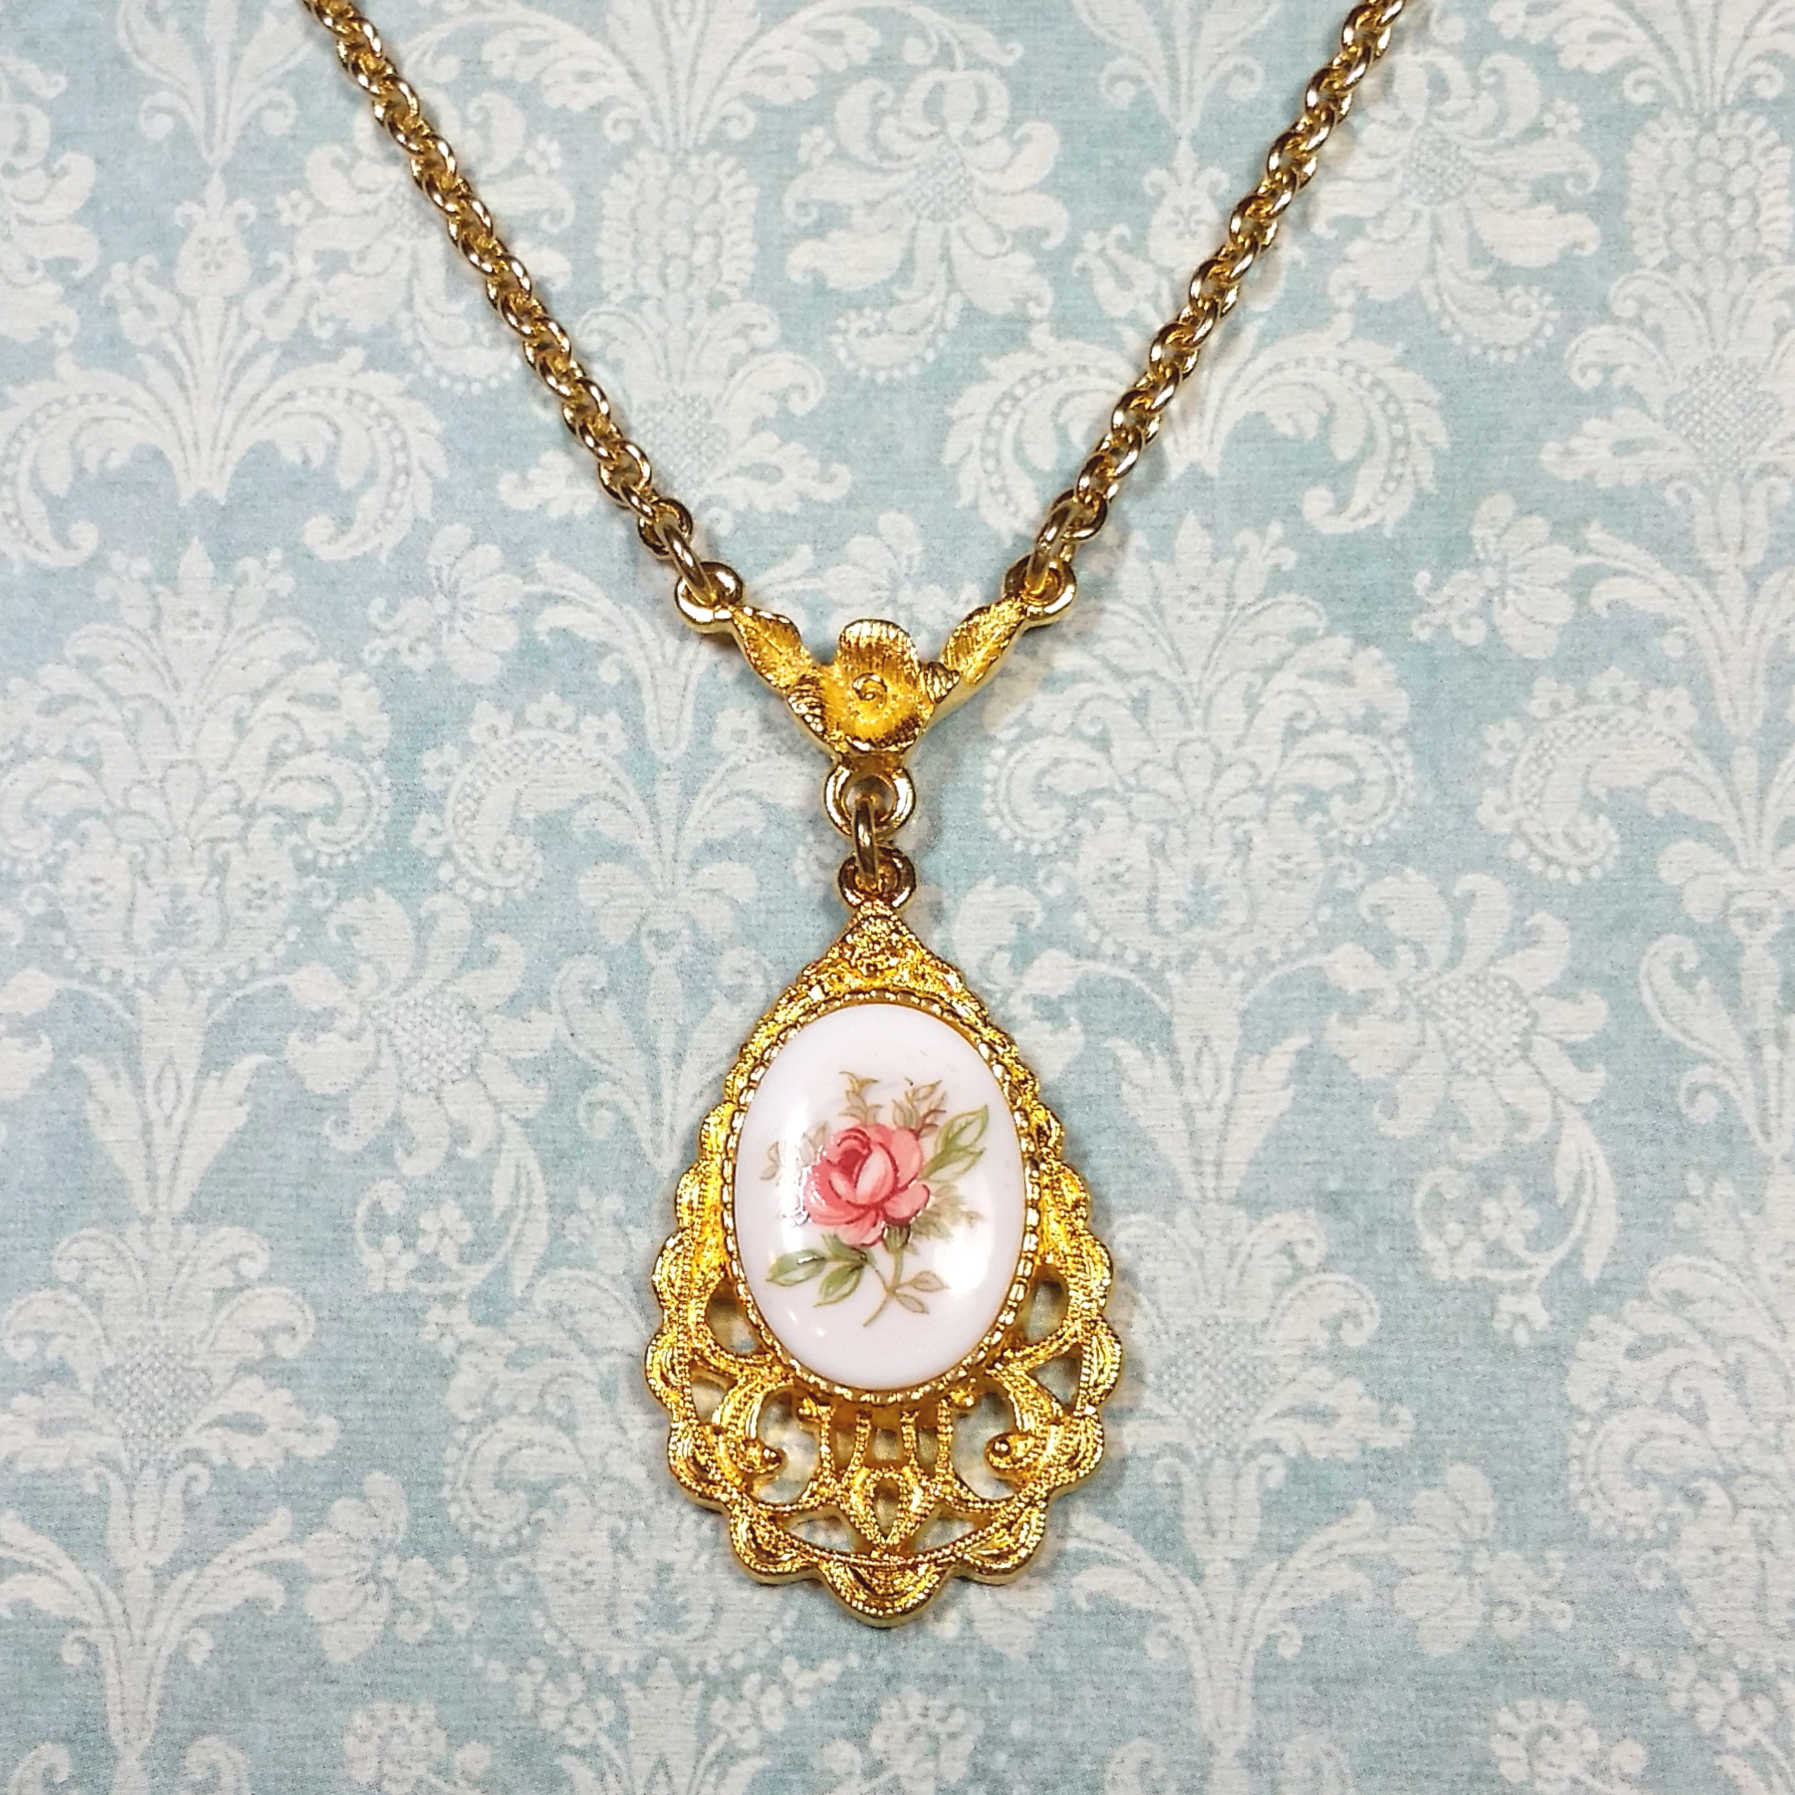 Pink Rose Cameo Necklace Romantic Style Rose Pendant - Etsy